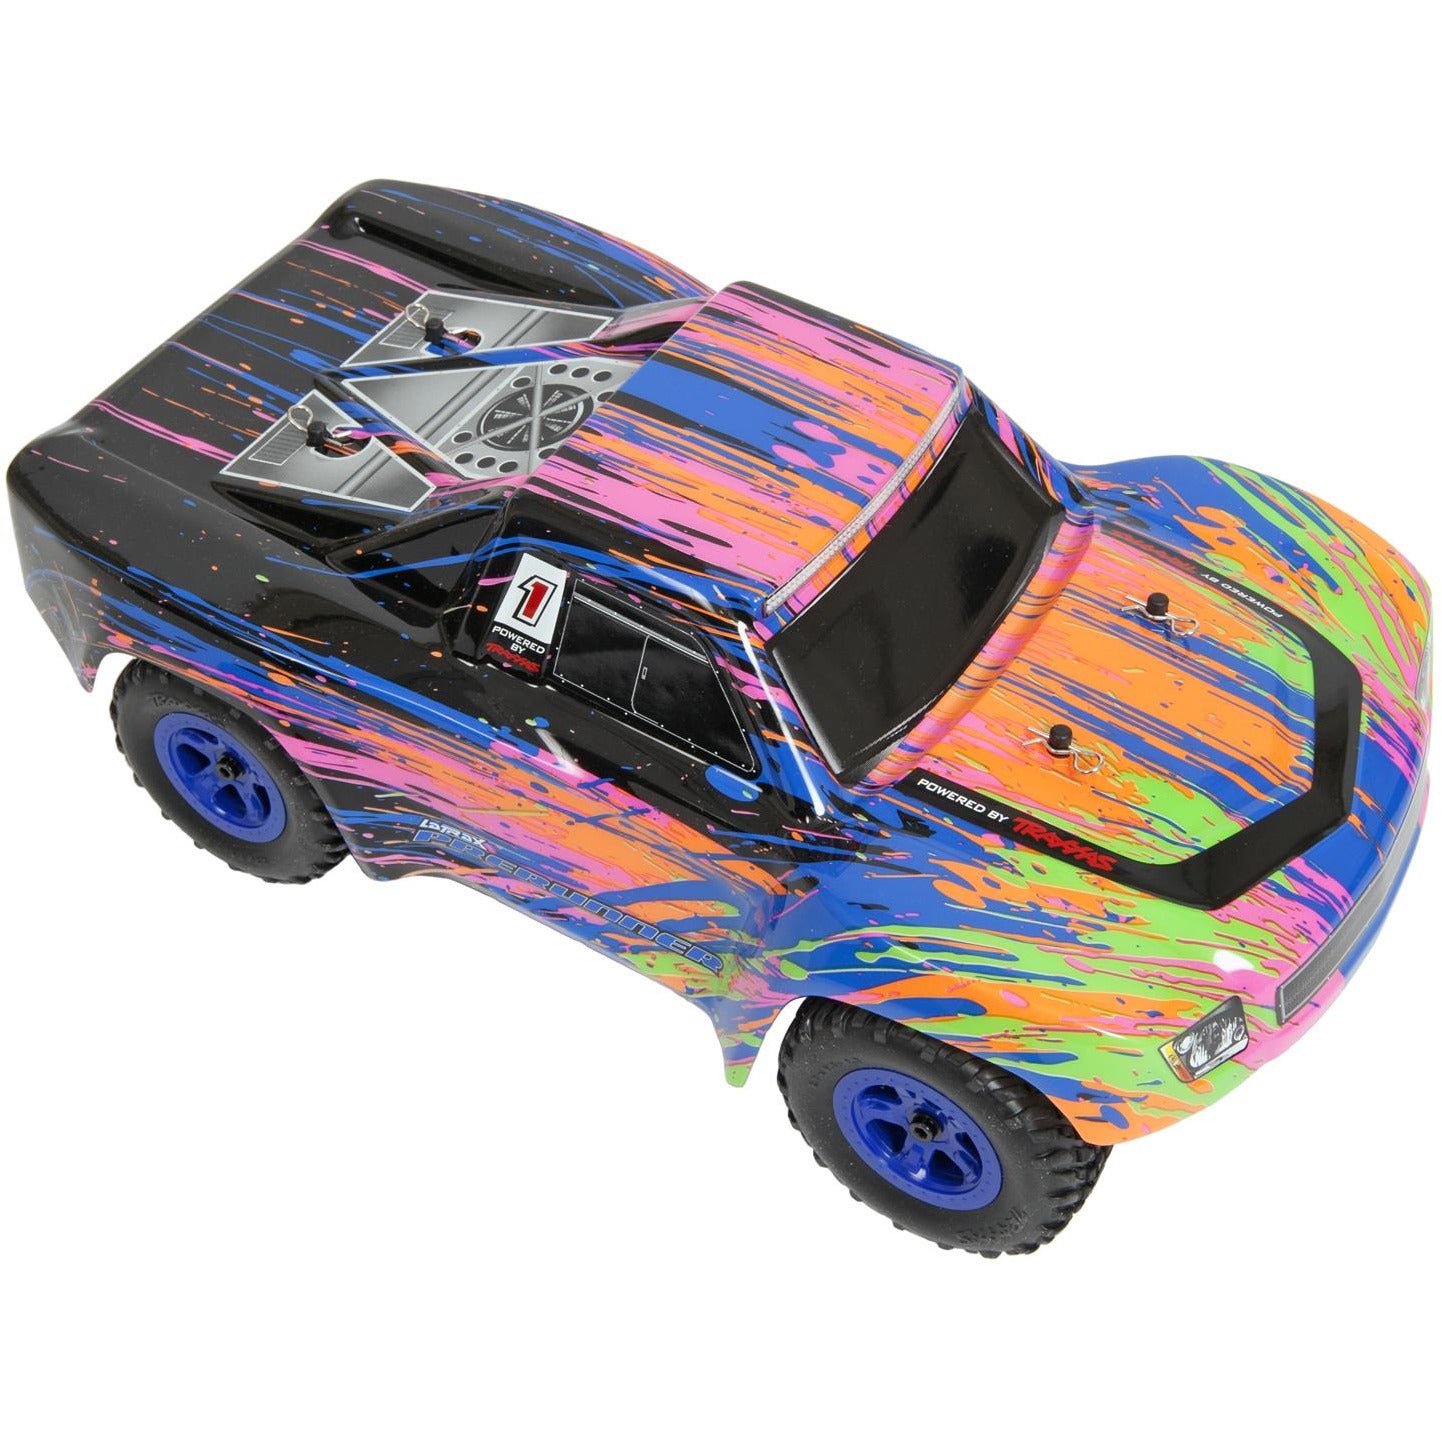 Traxxas 1/18 4WD Racing Truck RTR LaTrax Prerunner - Assorted Colours TRA76064-5